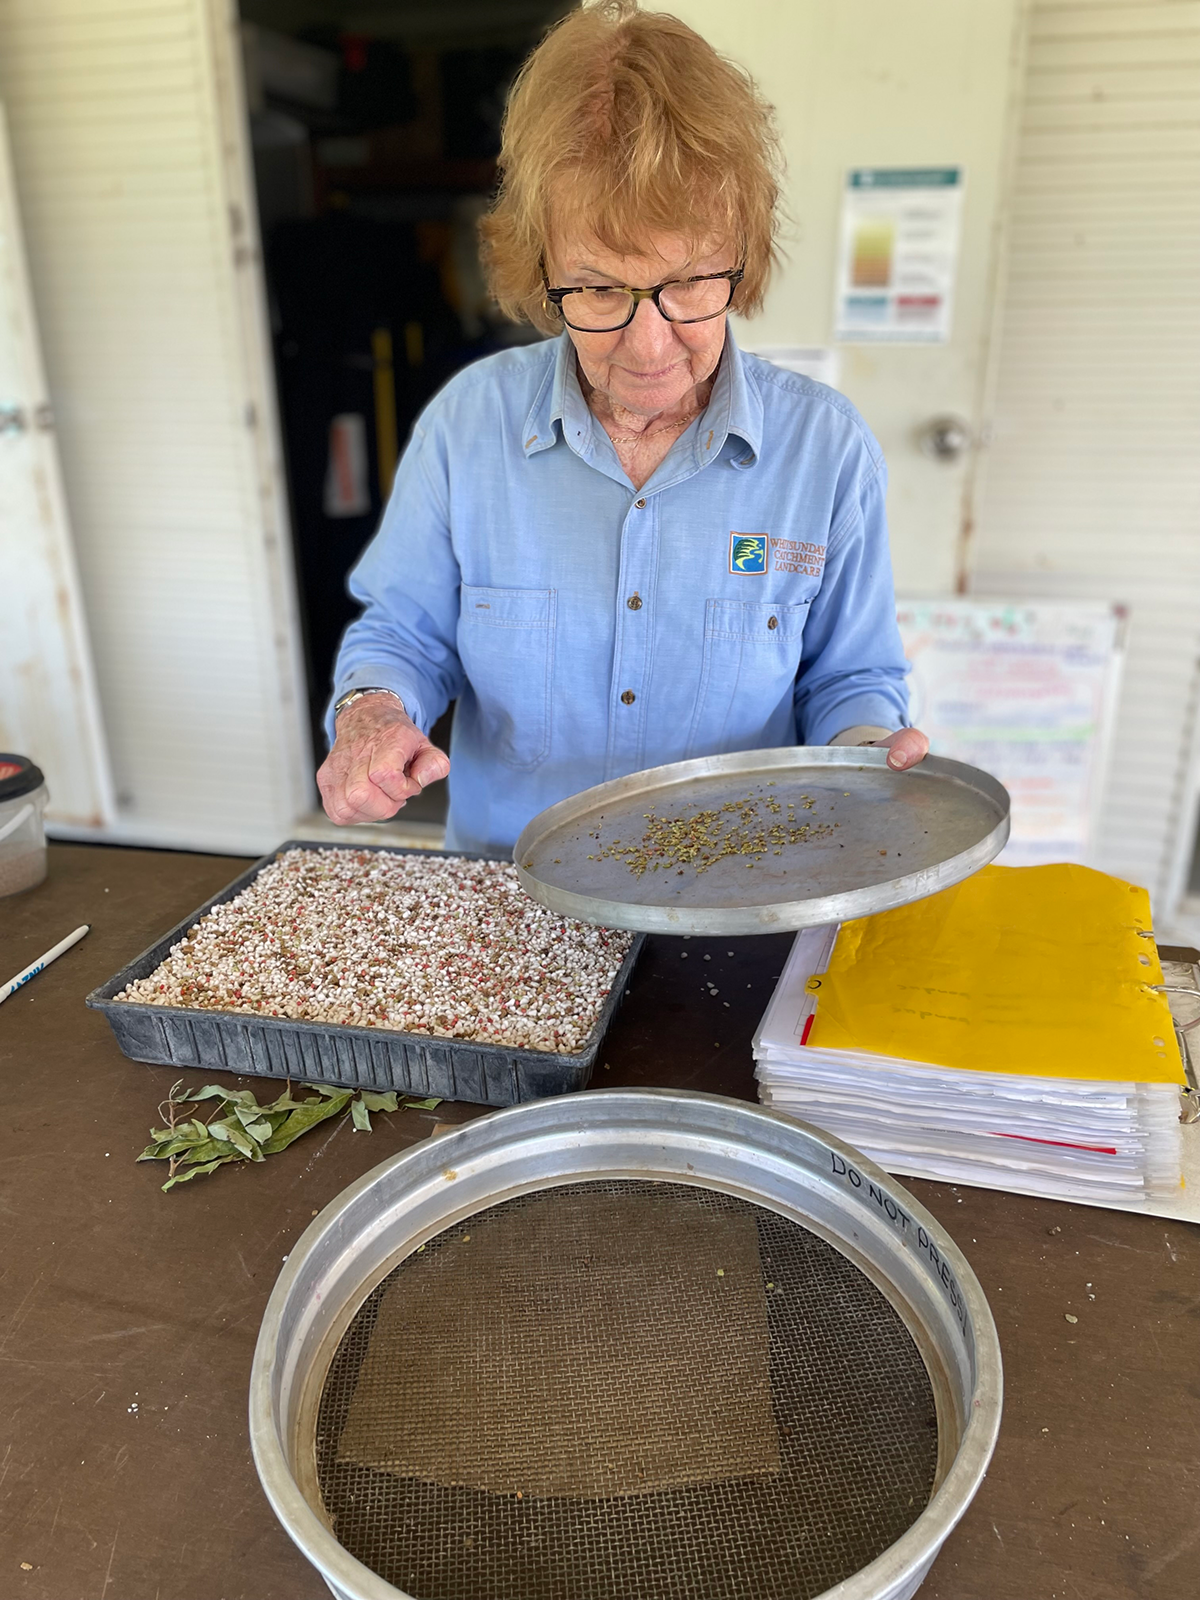 A volunteer sows seeds into a seed tray.